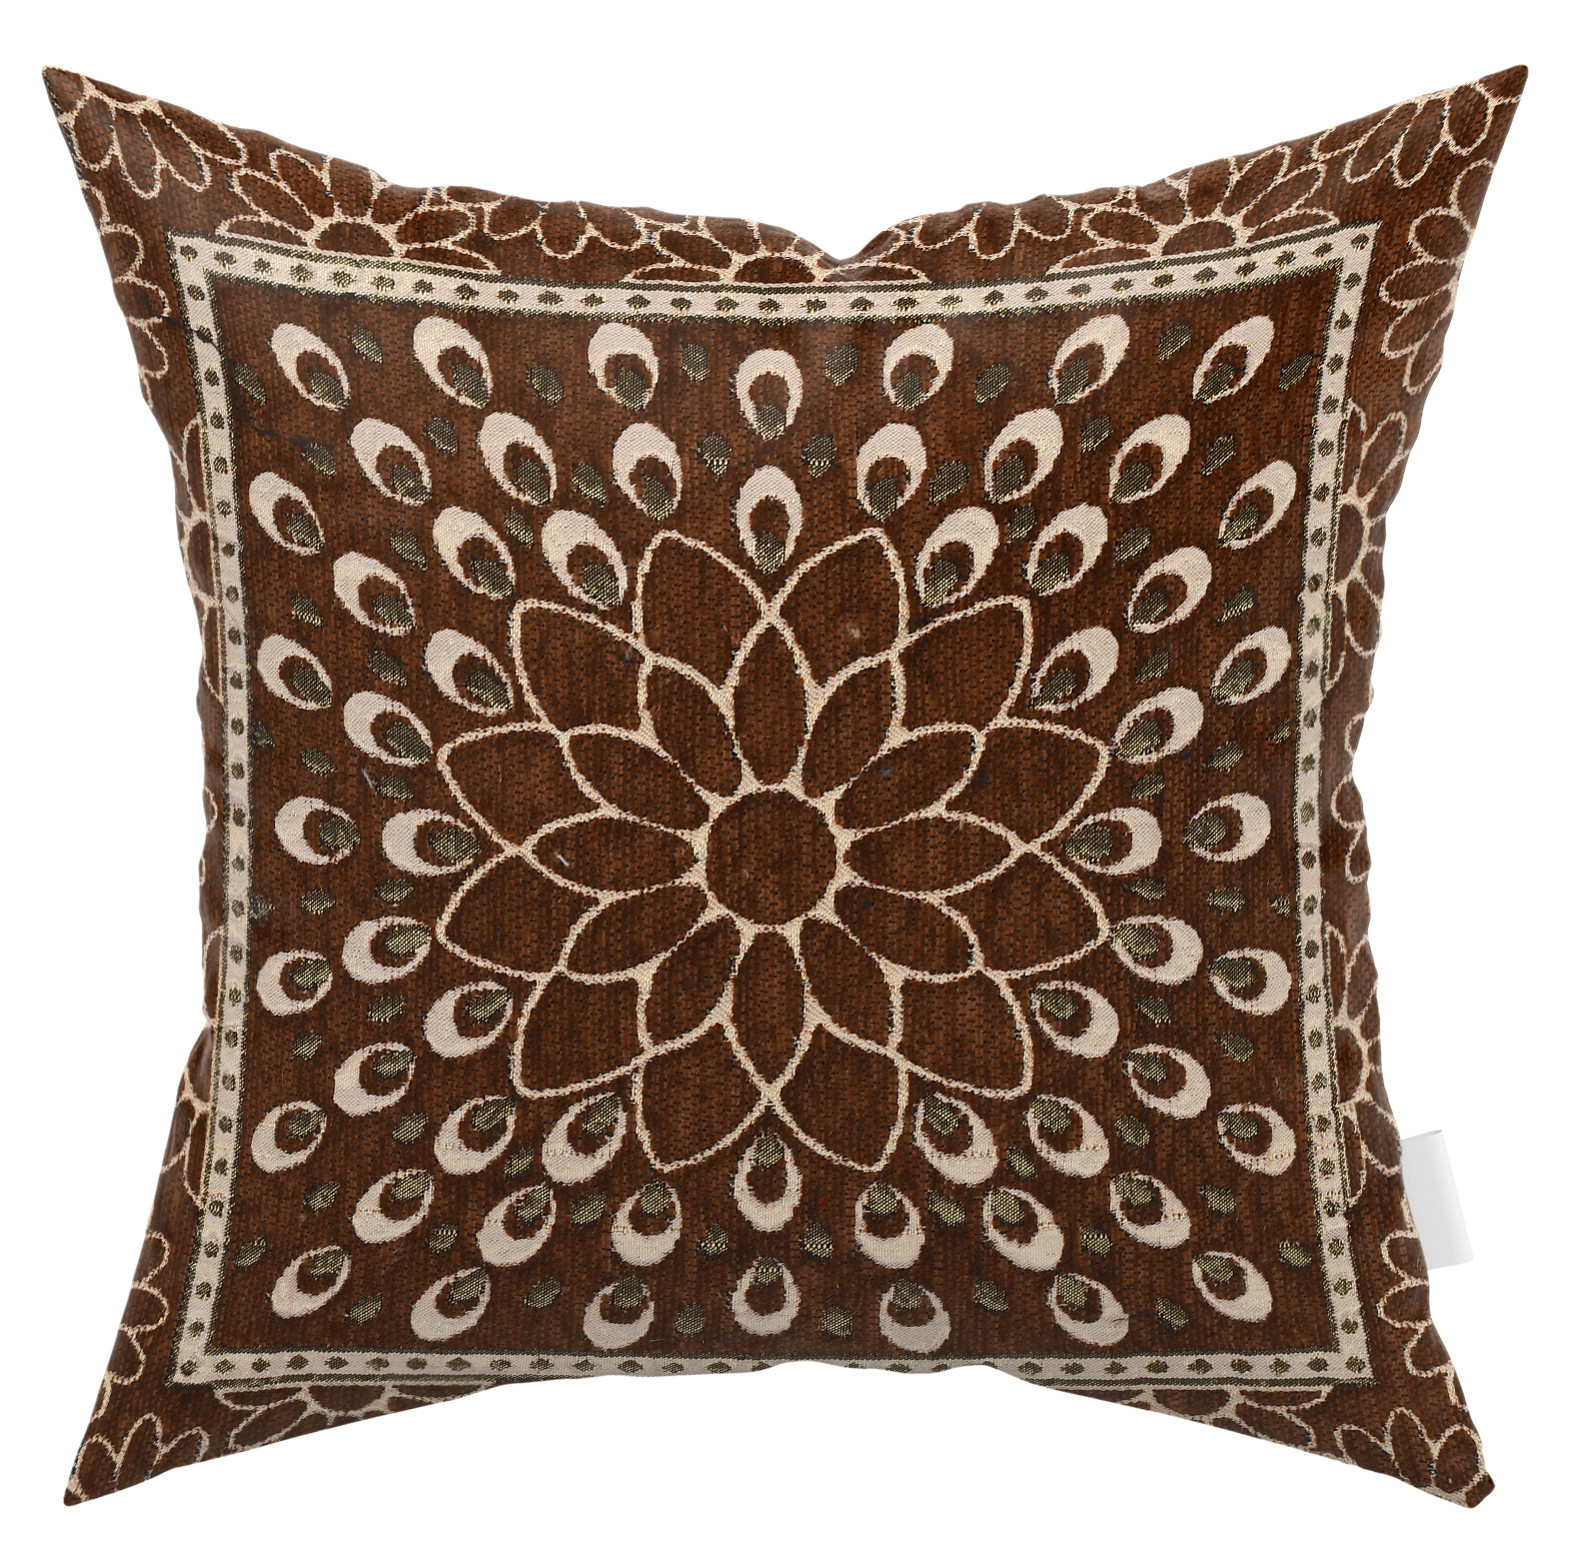 Kuber Industries Velvet Rangoli Design Soft Decorative Square Throw Pillow Cover, Cushion Covers, Pillow Case For Sofa Couch Bed Chair 16x16 Inch-(Brown)